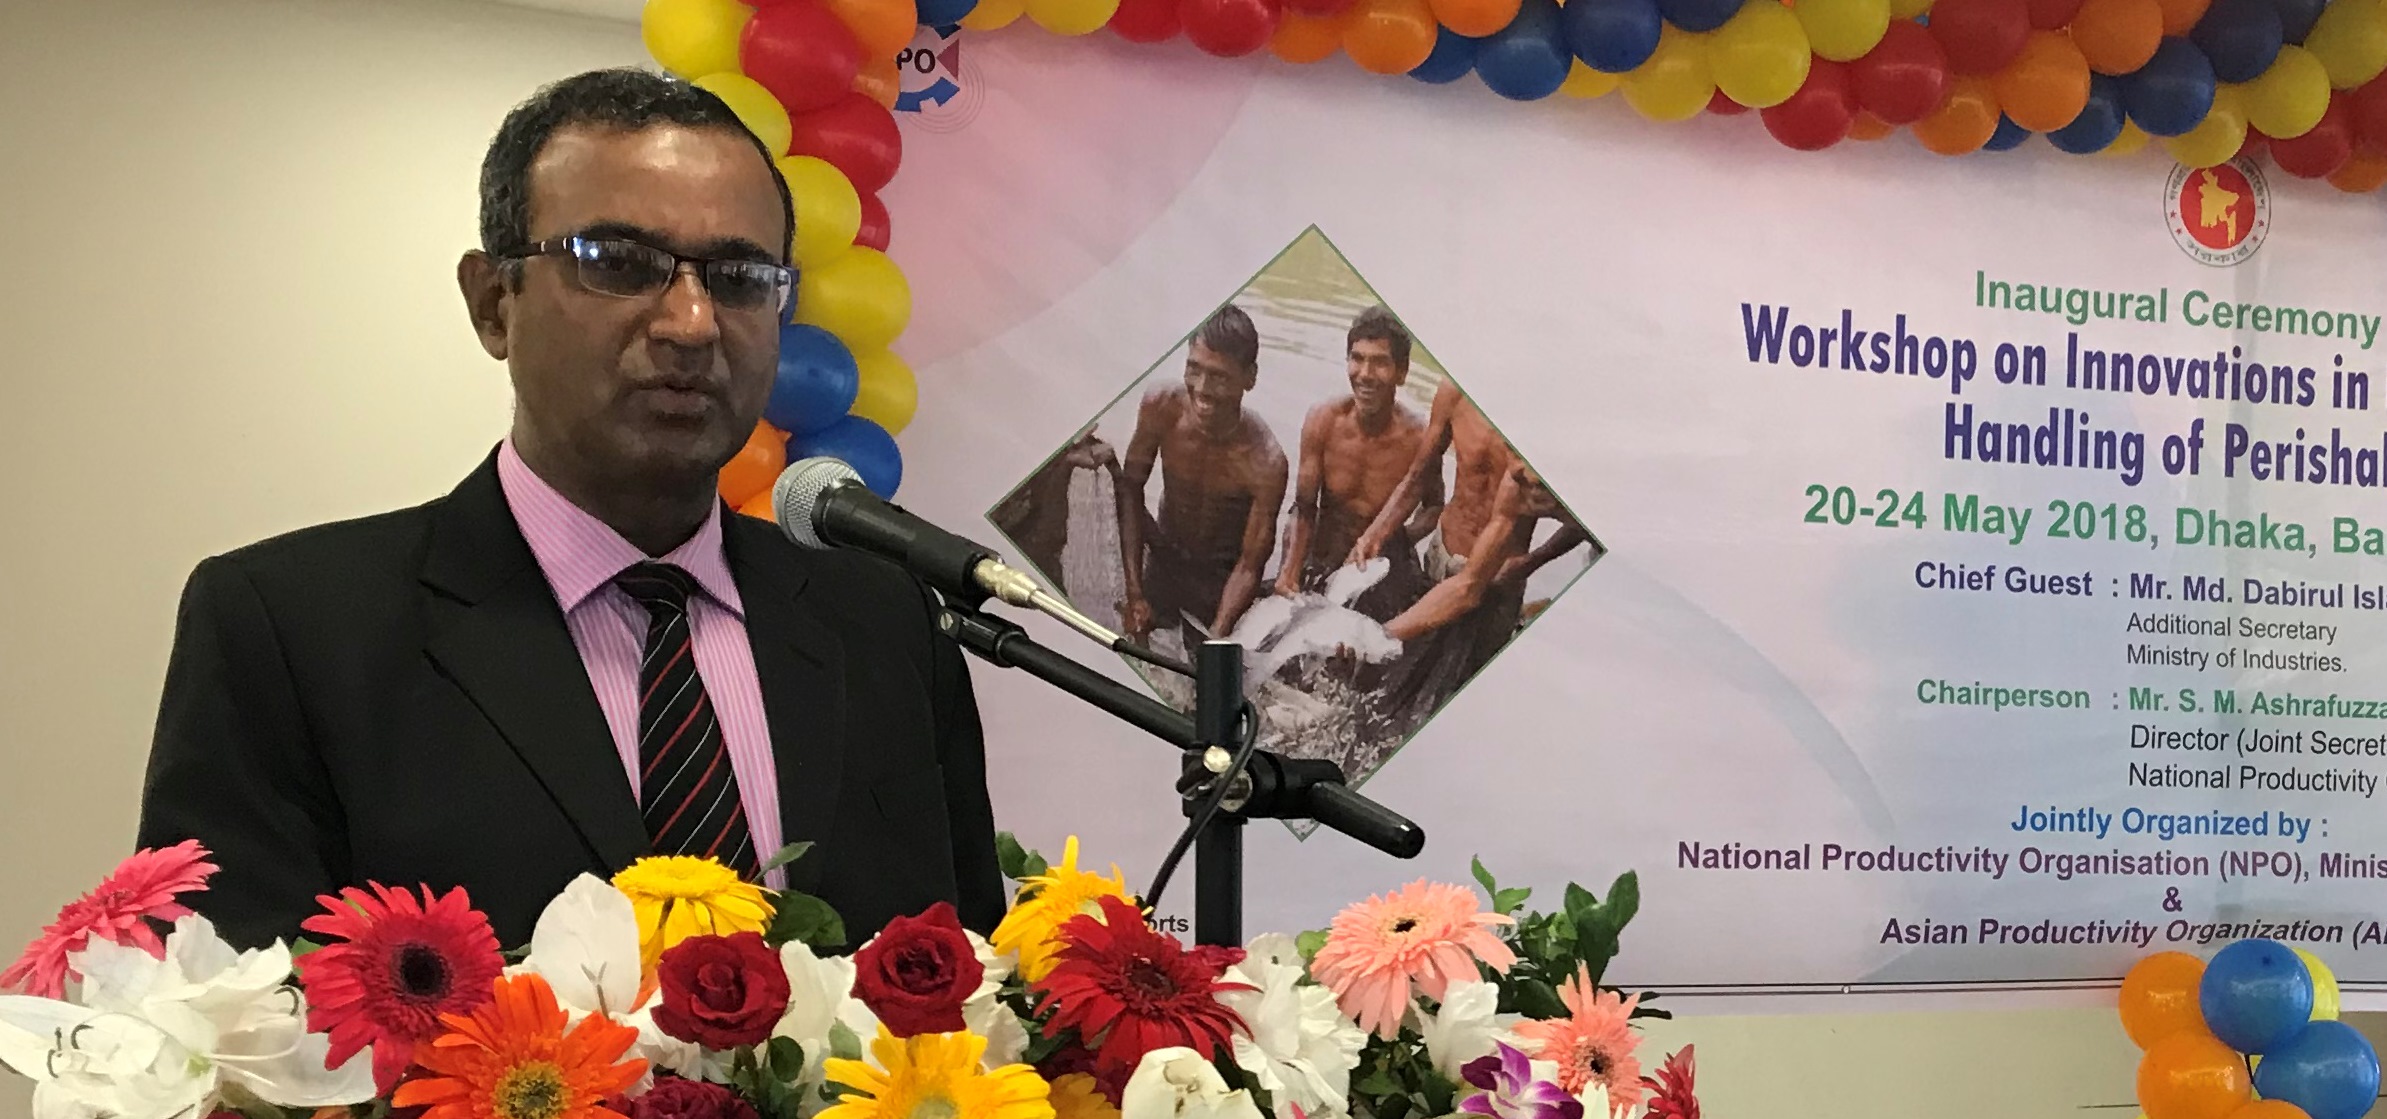  Additional Secretary Md. Dabirul Islam of the Ministry of Industry of Bangladesh delivering inaugural address during the opening session of the workshop on Innovations in Postharvest Handling of Perishables, Dhaka, 20 May 2018.